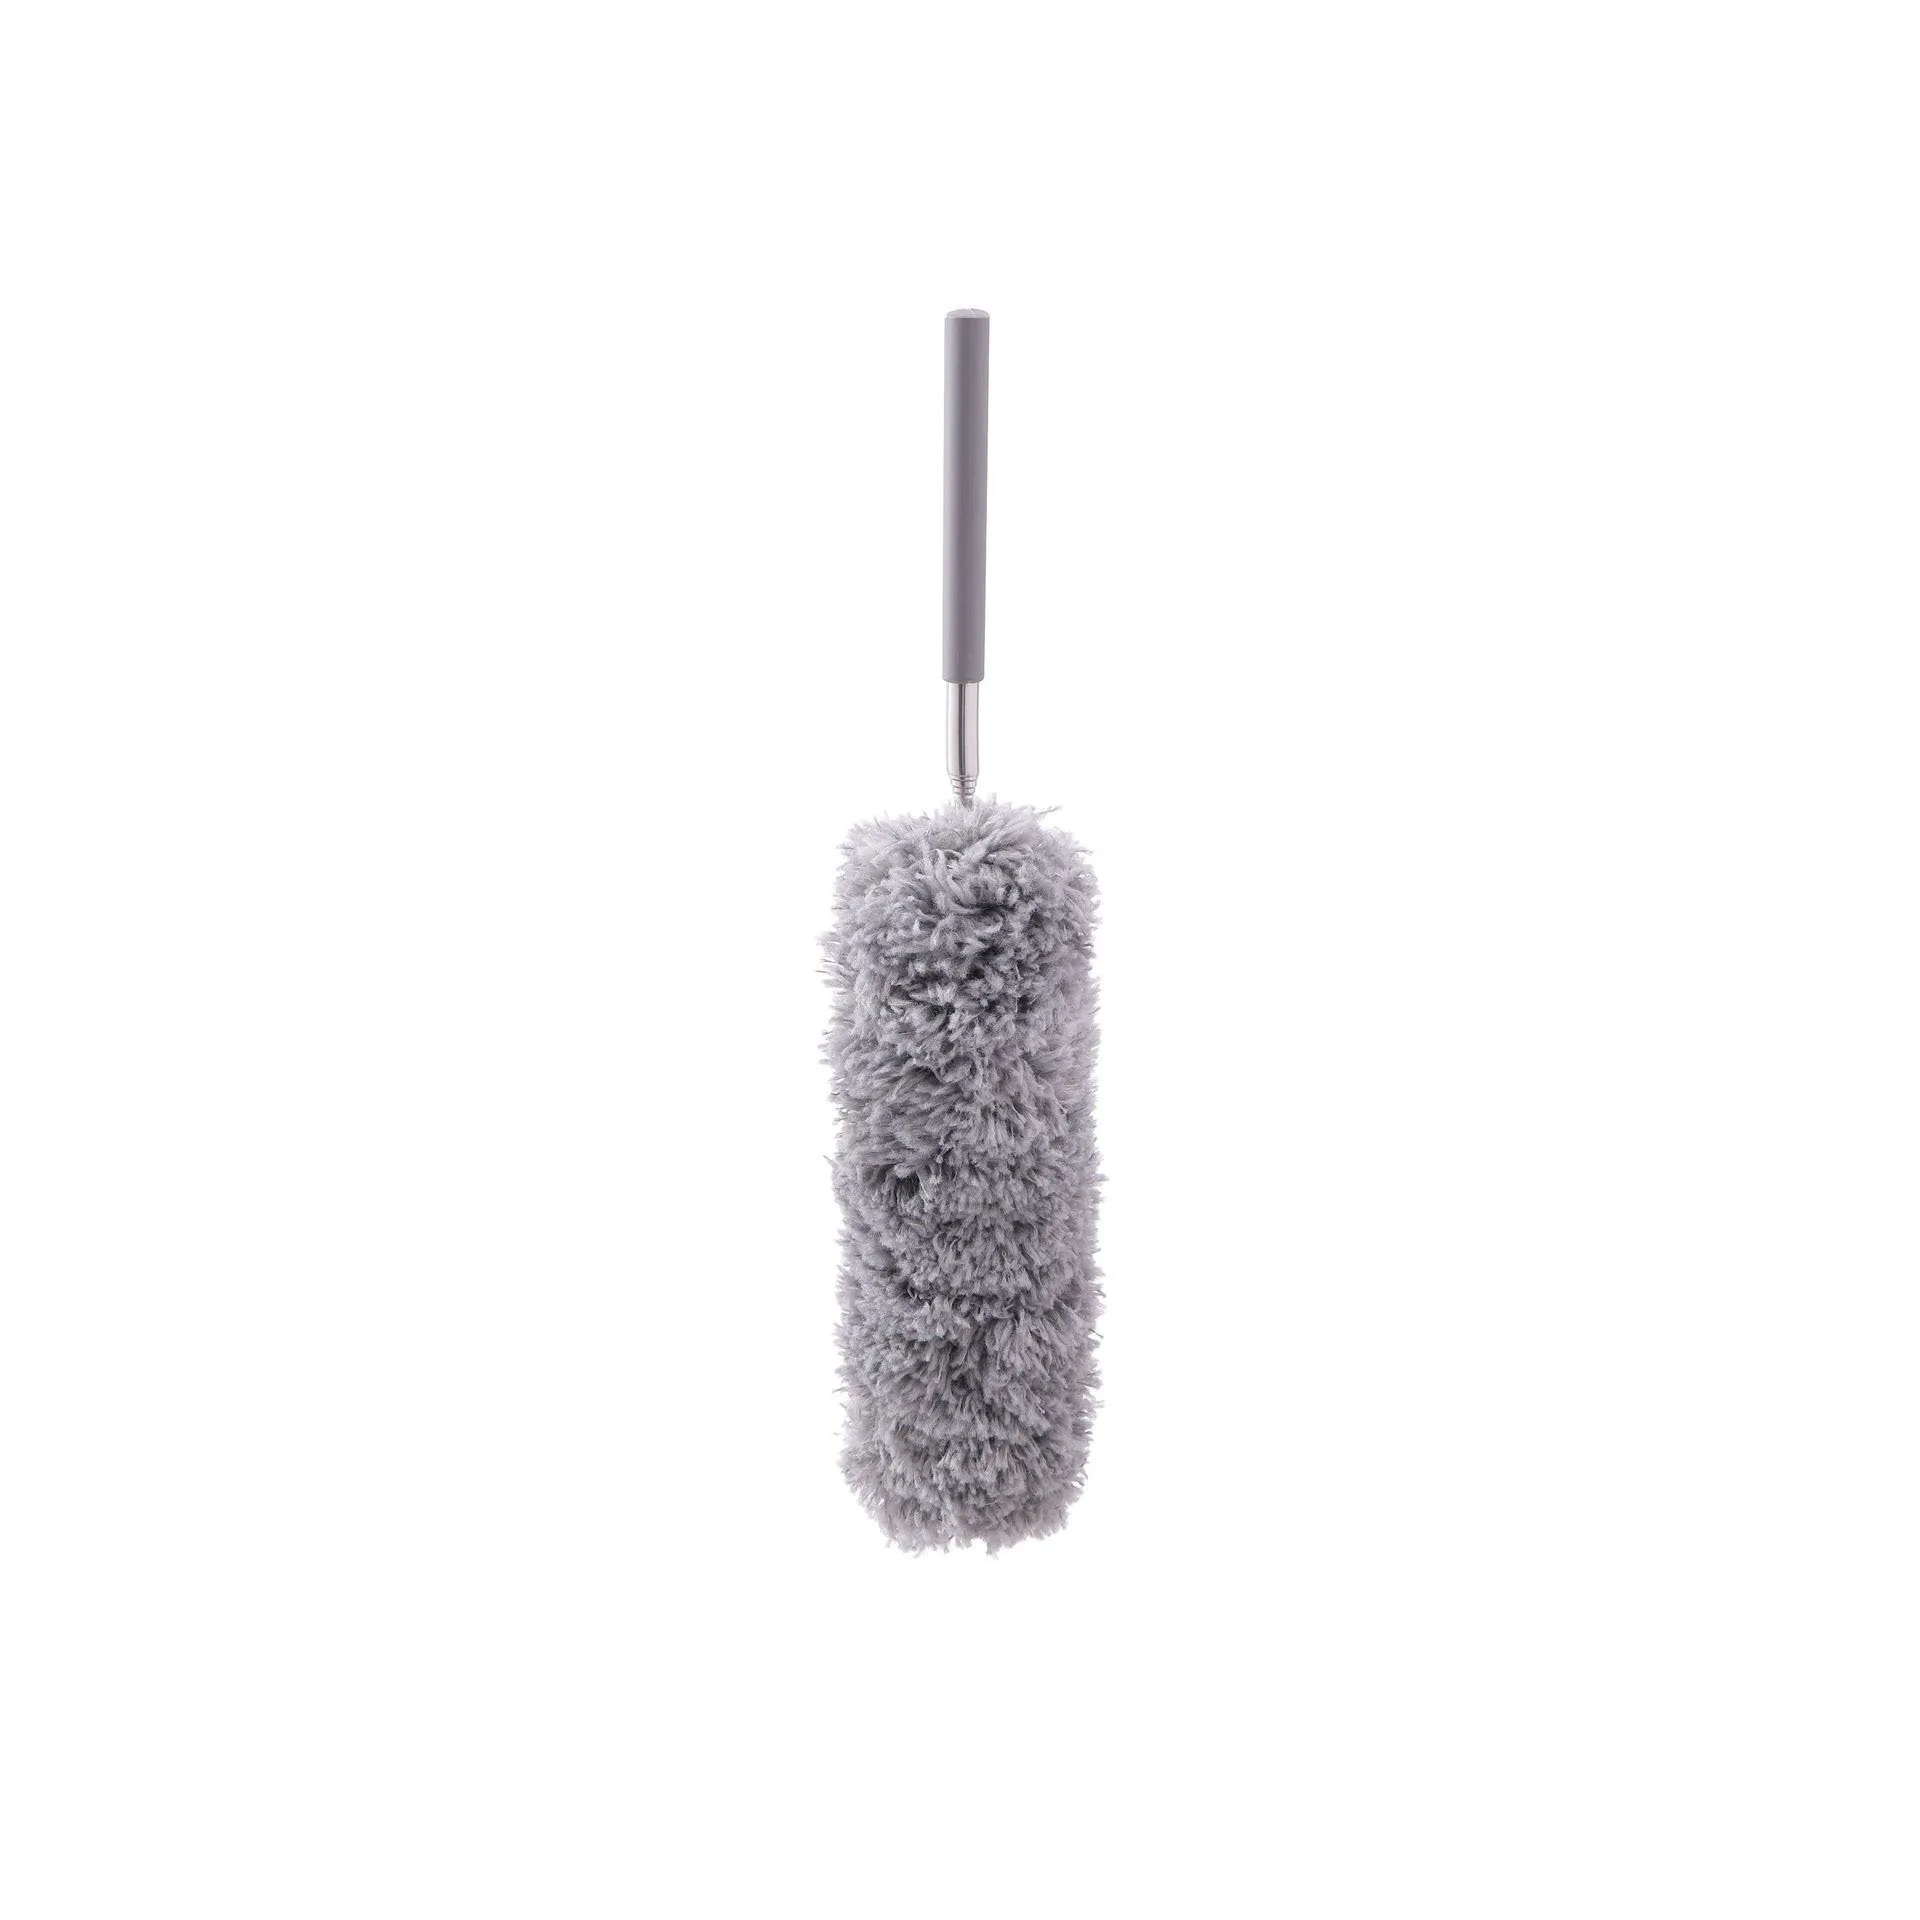 

C141 Stretch Extend Microfiber Dust Brush Adjustable Feather Duster Household Dusting Brush Telescopic Car Cleaning Duster